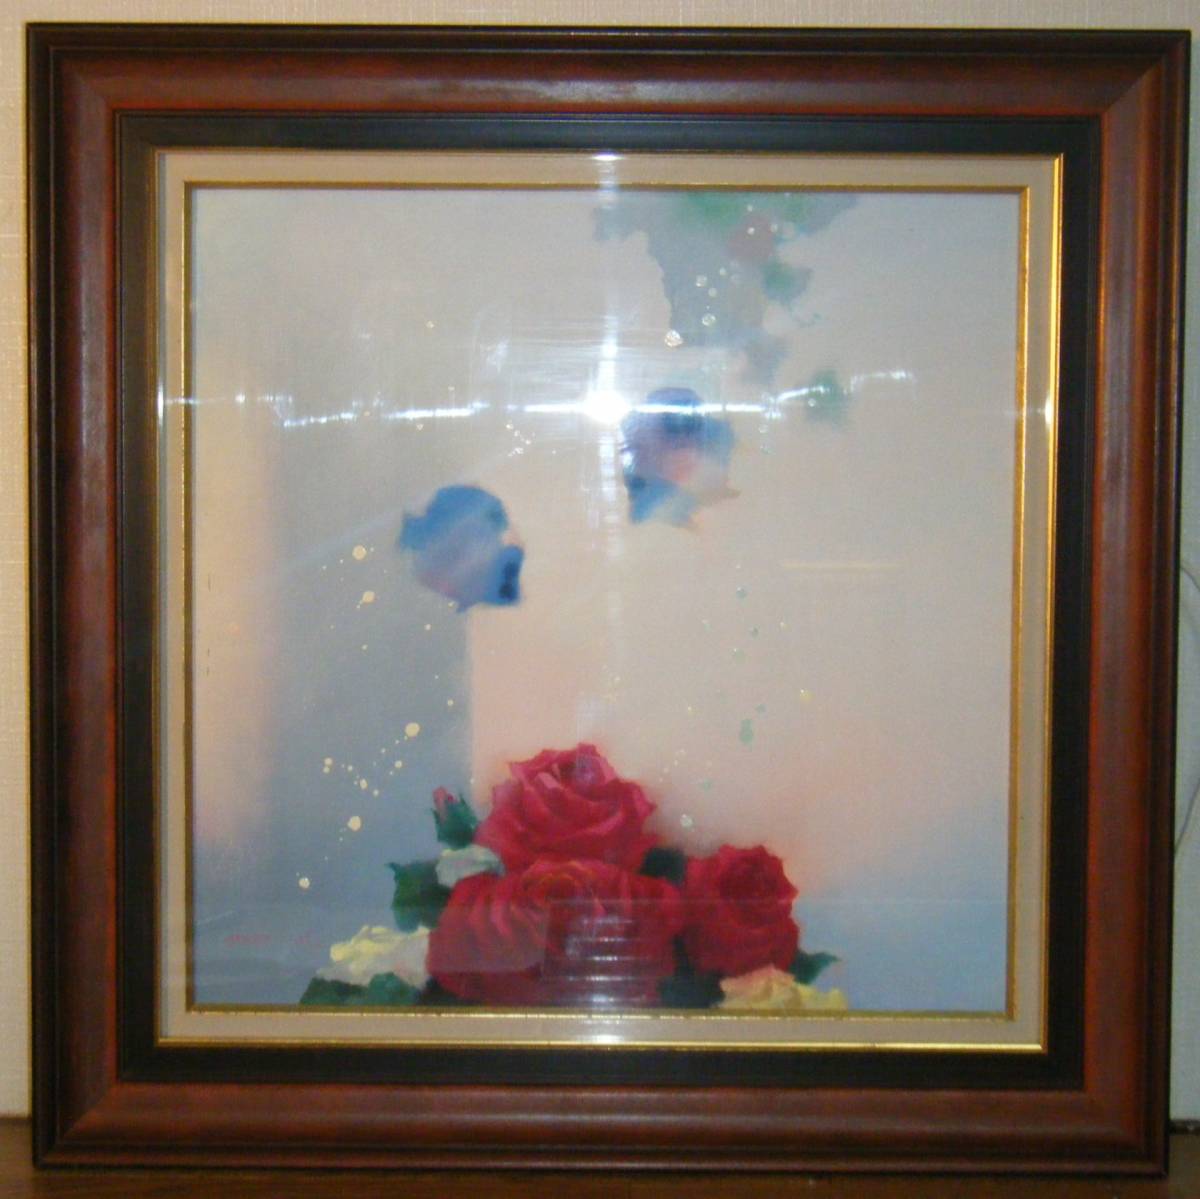 [Genuine] Painting by Hiroo Miyagawa Oil painting Roses and tropical fish Single painting Boxed N82, Painting, Oil painting, Still life